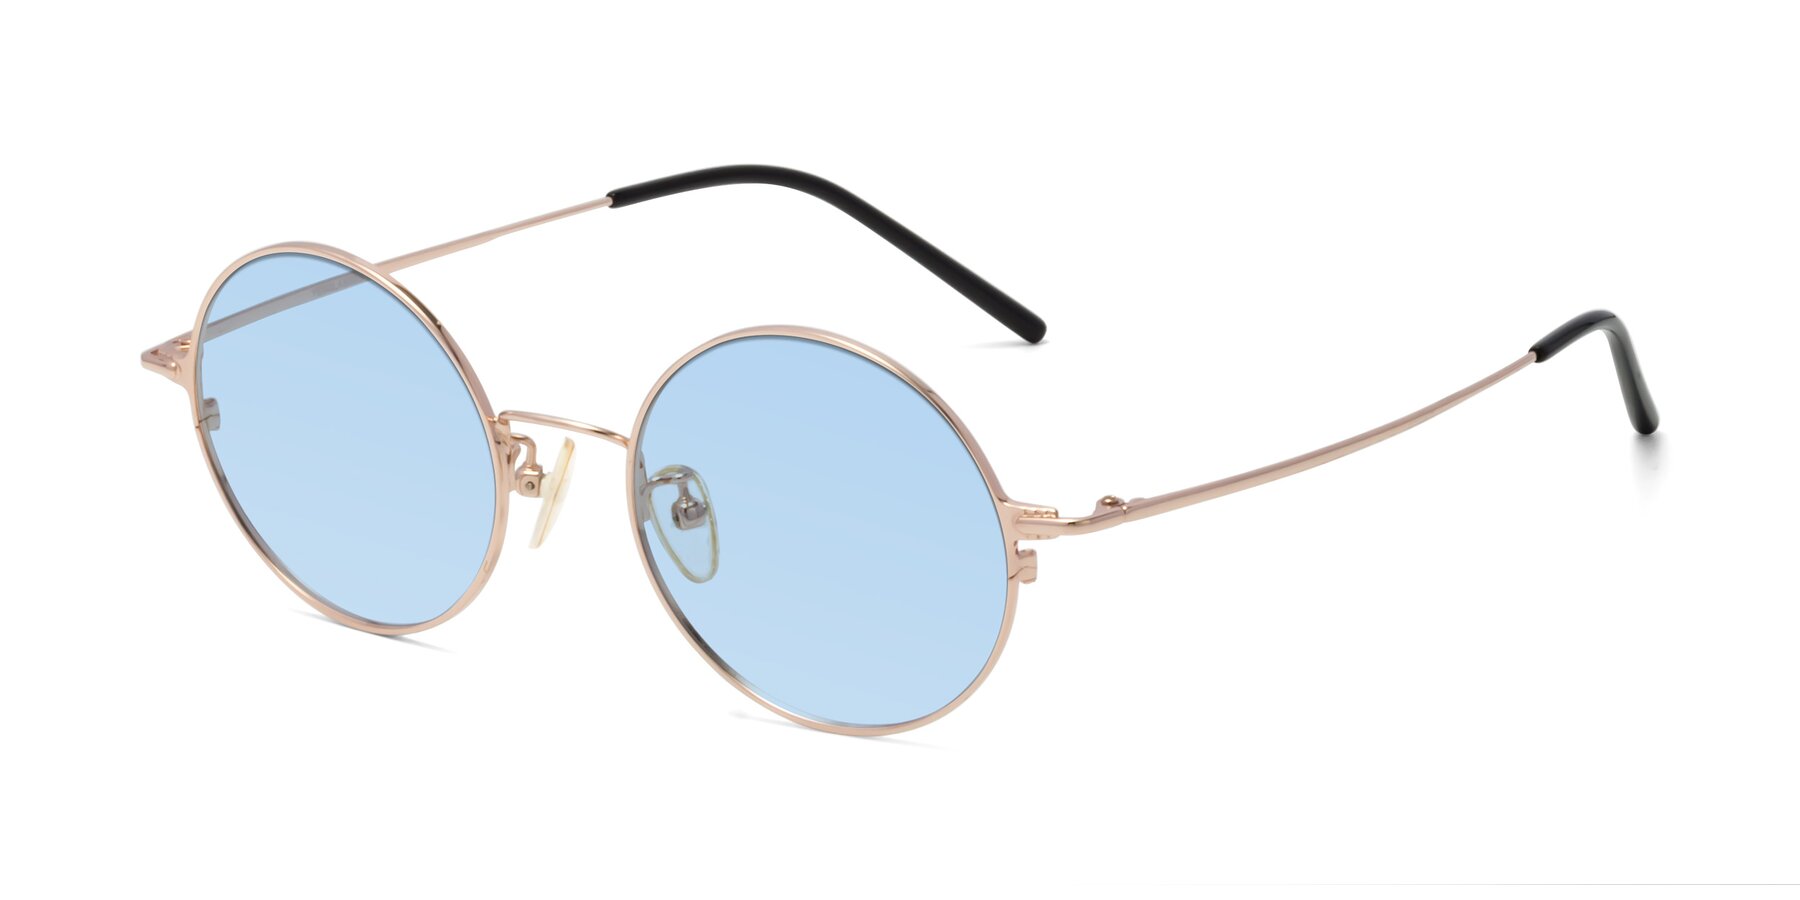 Angle of 18009 in Rose Gold with Light Blue Tinted Lenses